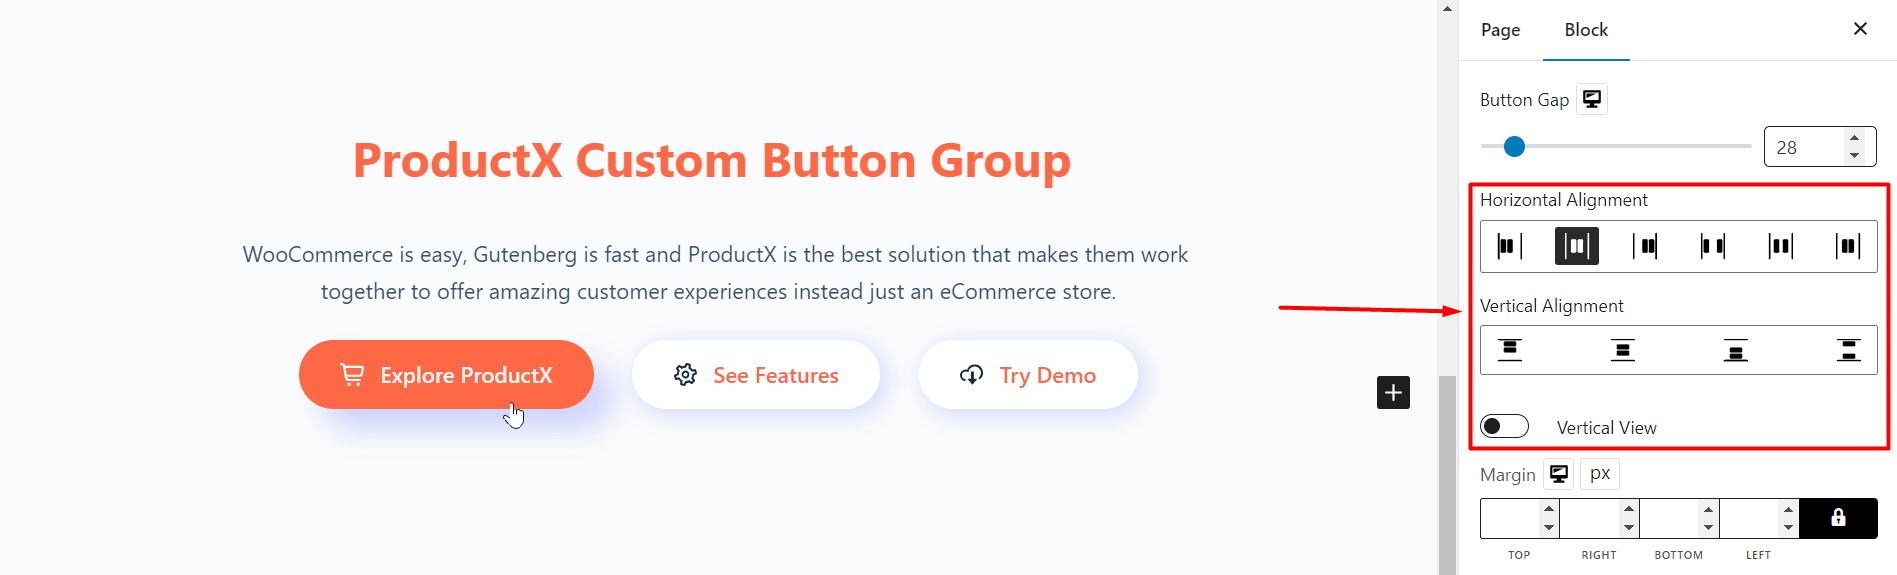 Custom button group alignment and animation settings 